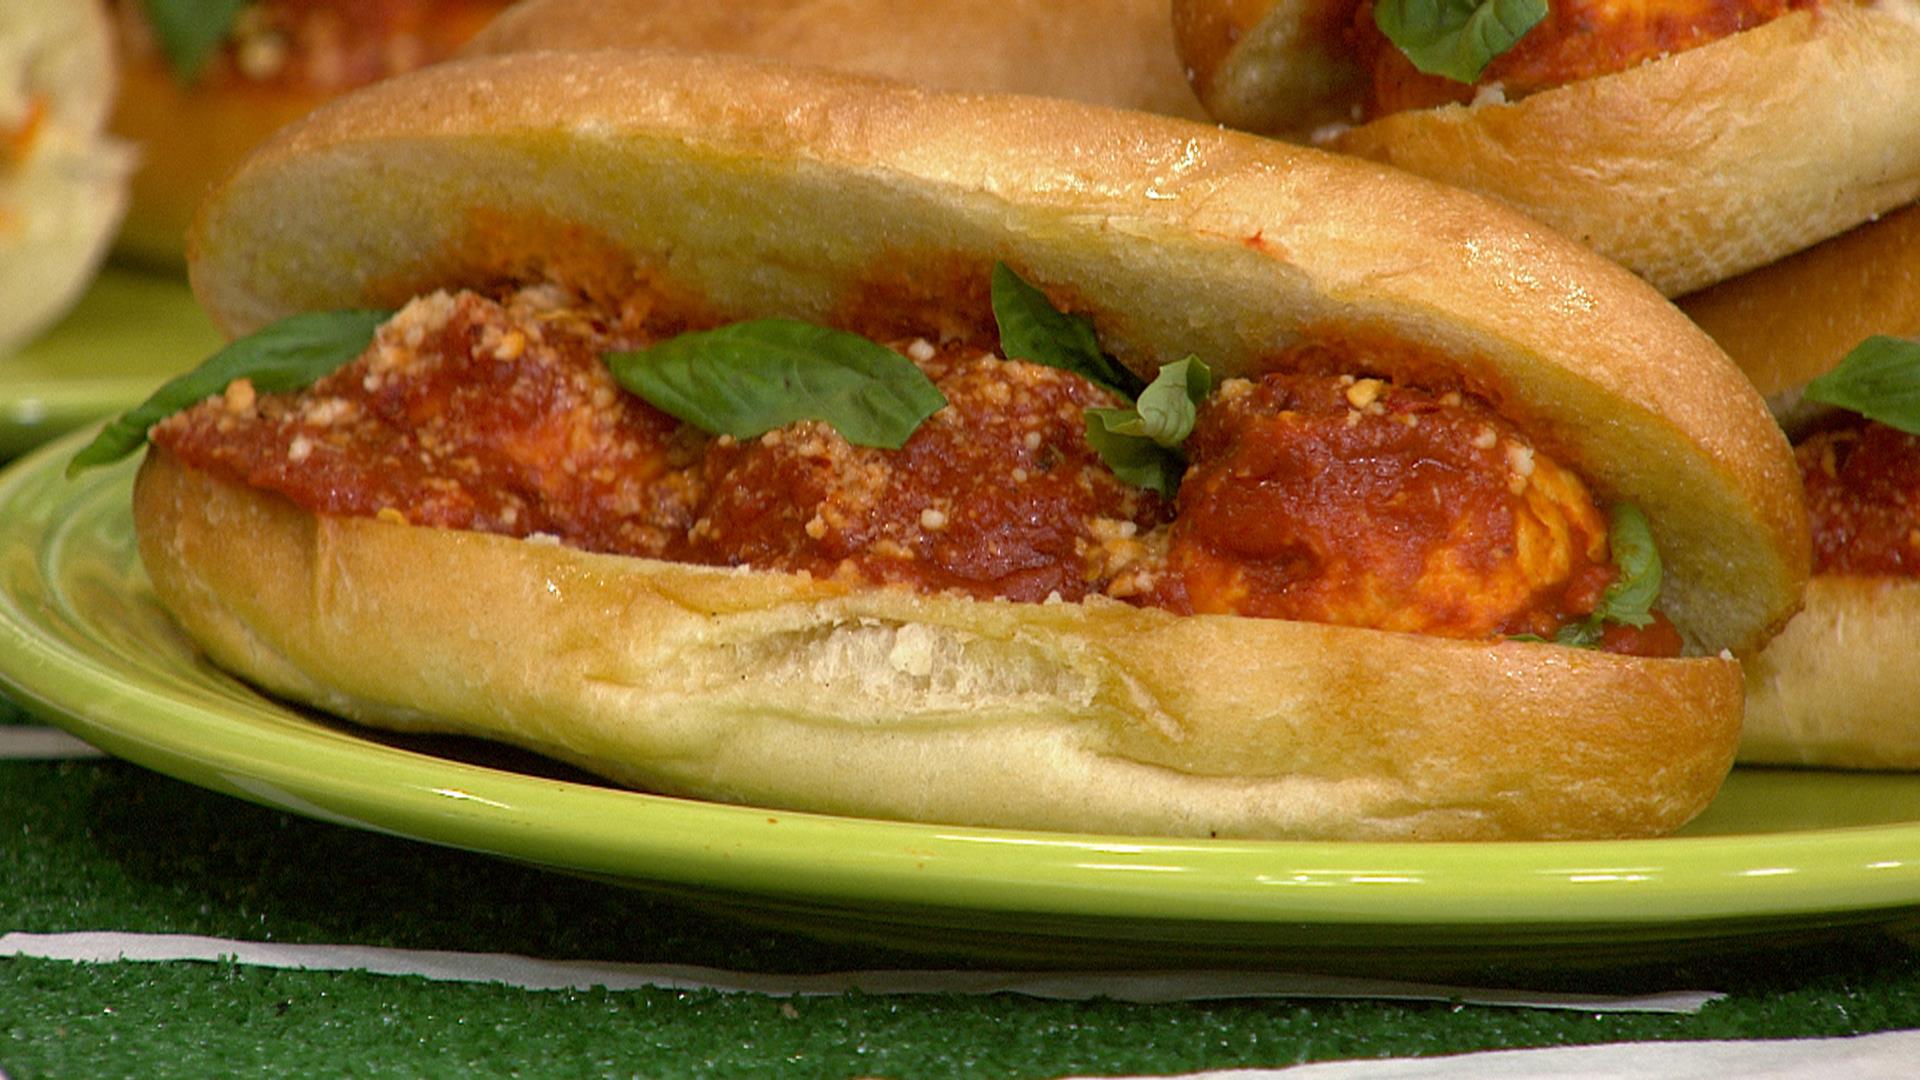 Turkey meatball subs, ragu pasta: Perfect meals for cold game days